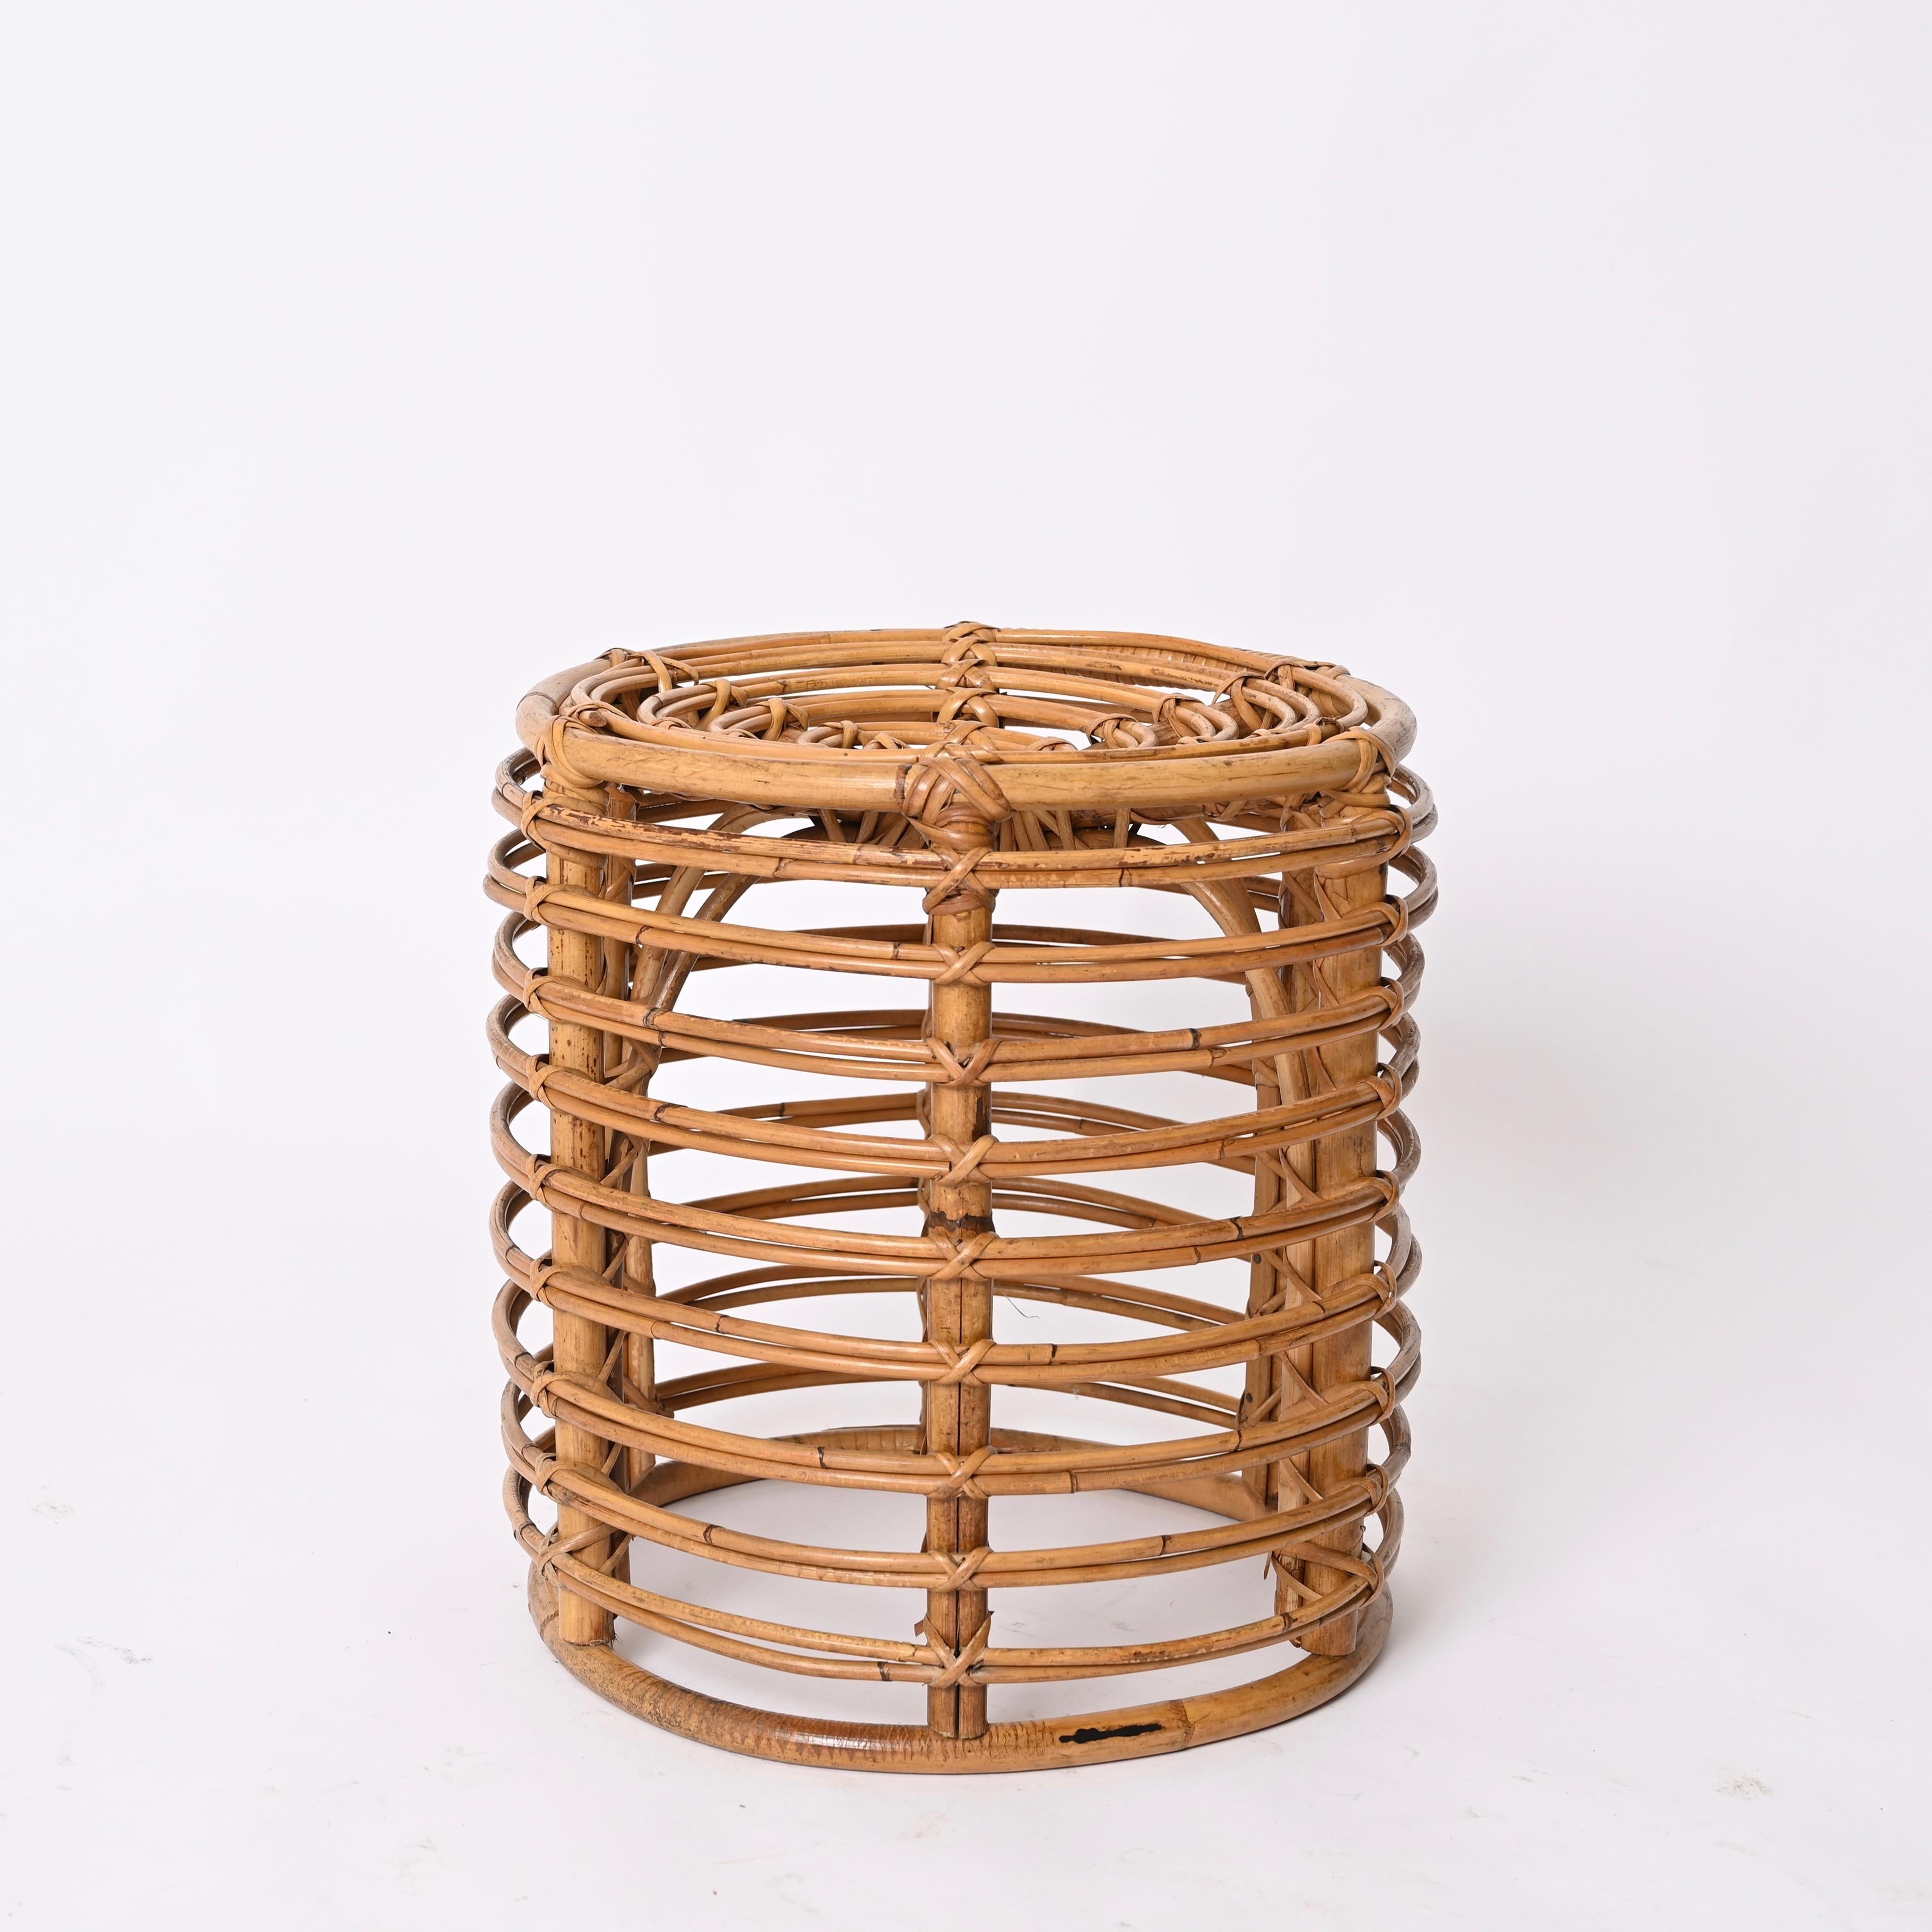 Hand-Crafted Midcentury Tito Agnoli Rattan and Wicker Round Pouf Stool, Italy, 1970s